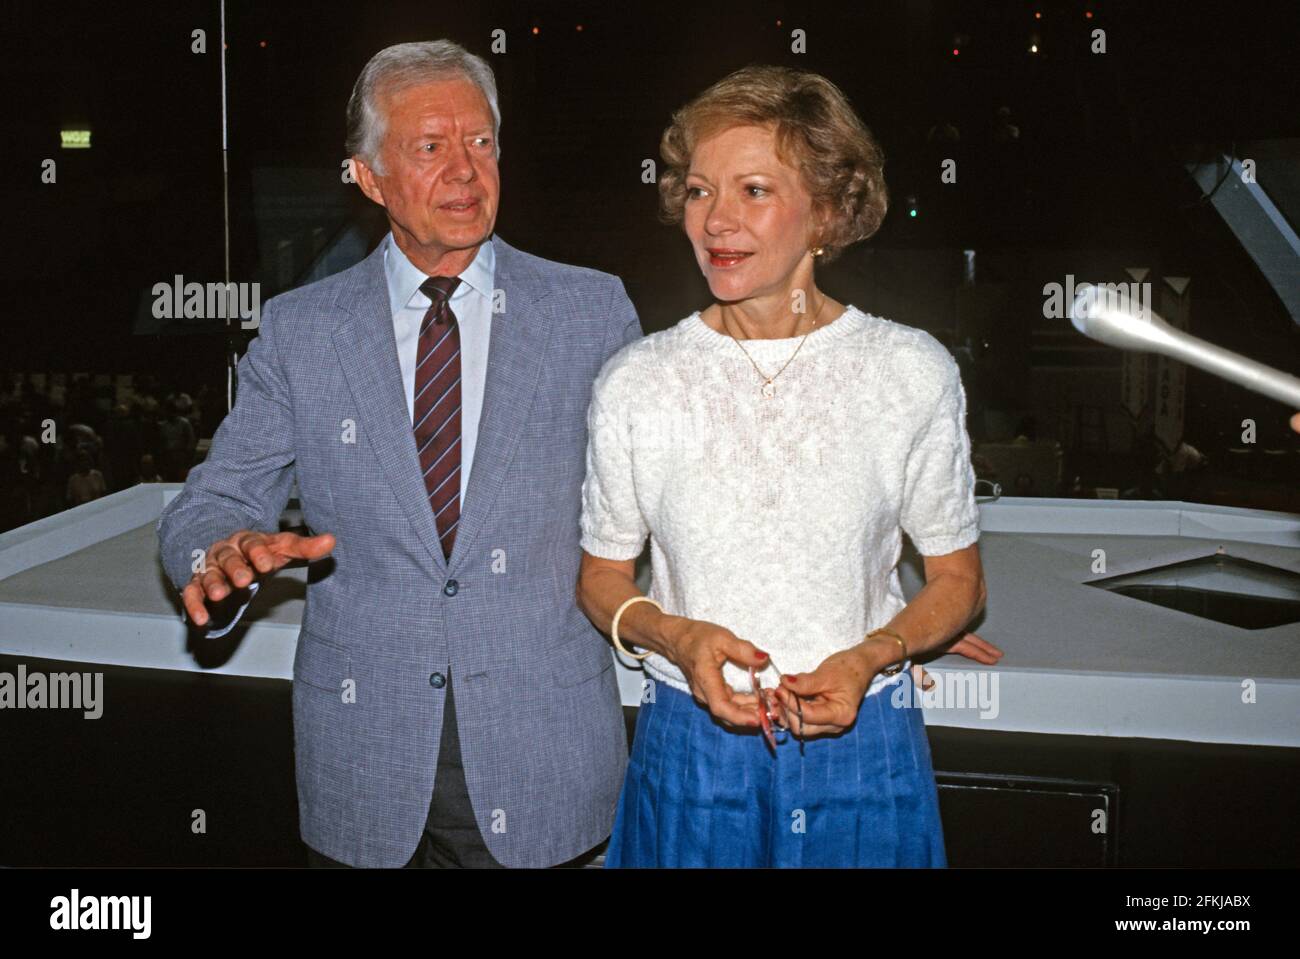 Former United States President Jimmy Carter, left, and former first lady Rosalynn Carter, right, visit the Omni Coliseum in Atlanta, Georgia, the site of the 1988 Democratic National Convention, prior to the President delivering remarks on July 18, 1988.Credit: Arnie Sachs/CNP/Sipa USA Credit: Sipa USA/Alamy Live News Stock Photo